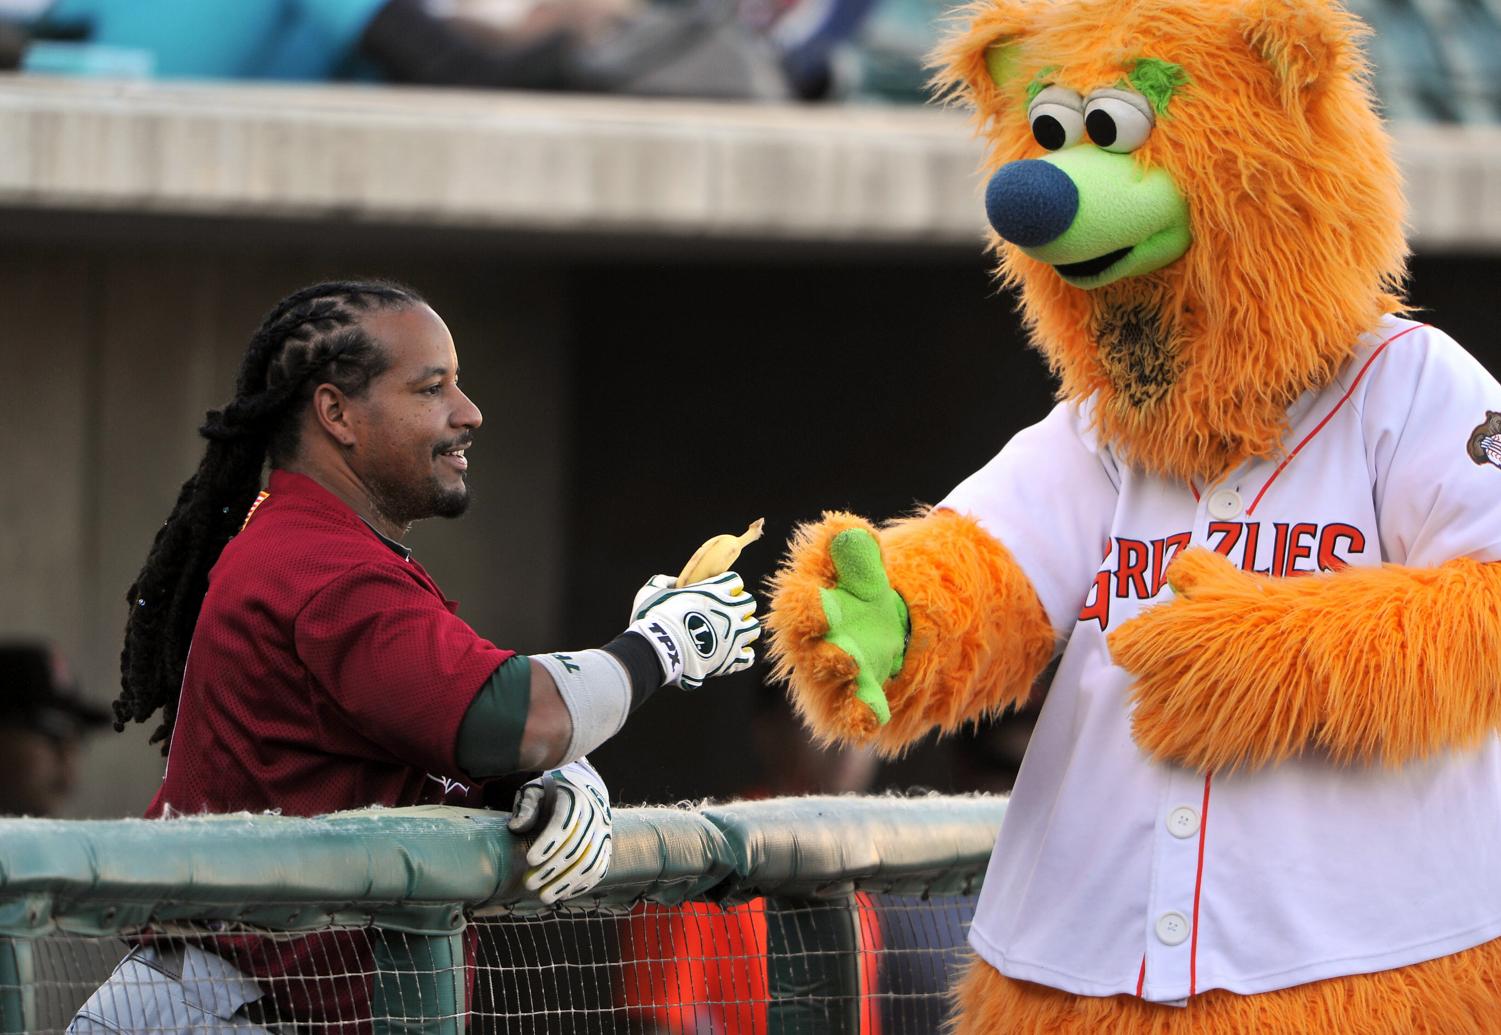 Manny Ramirez's first home run in Taiwan is outstanding